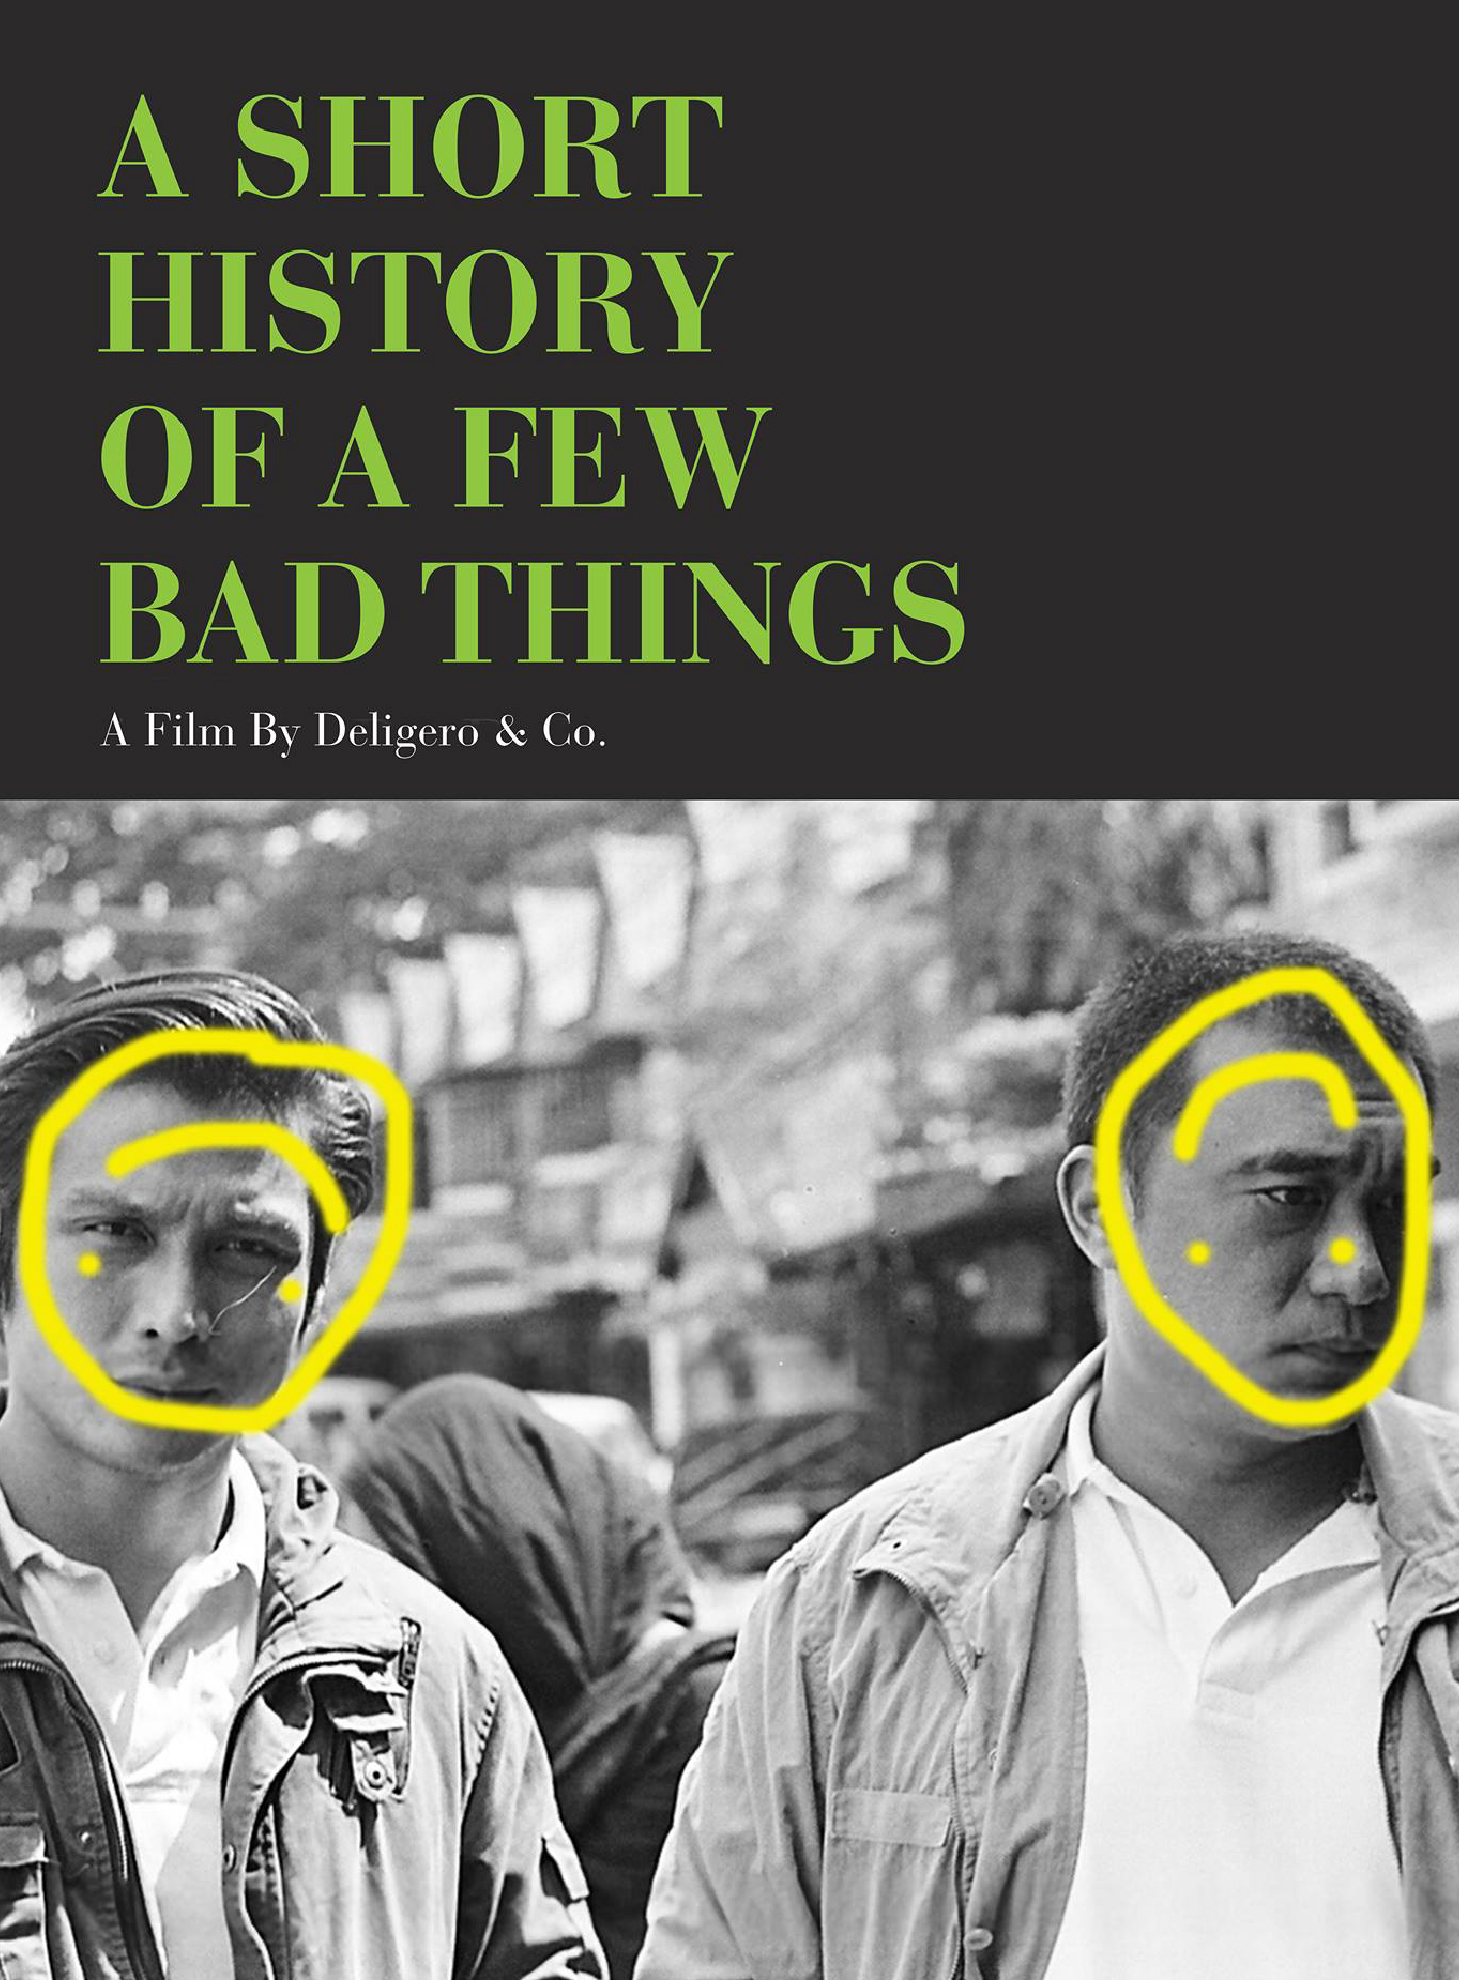 A SHORT HISTORY OF A FEW BAD THINGS